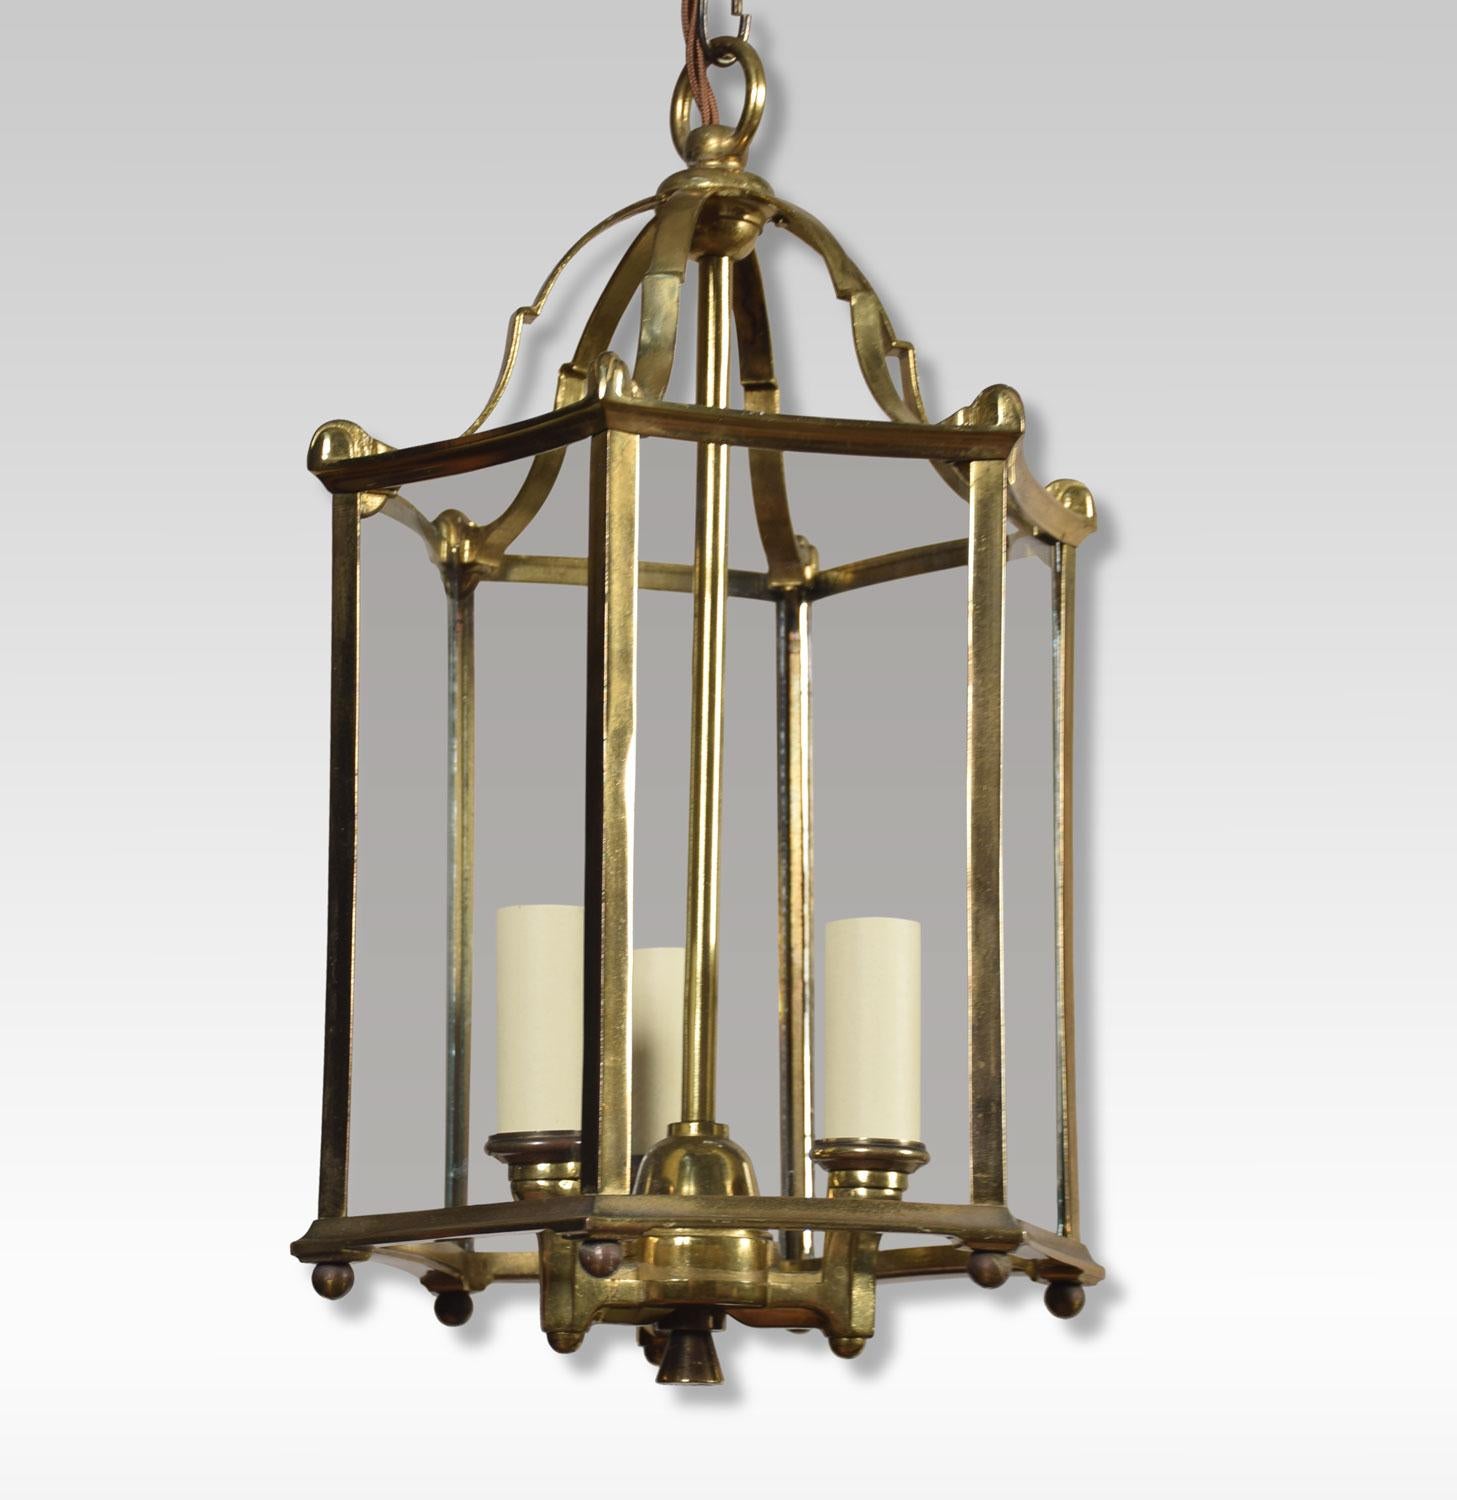 French brass and glass hexagonal paneled triple light hall lantern. The lantern has been re-wired.
Dimensions:
Height 15.5 Inches
Width 9.5 Inches
Depth 9.5 Inches.